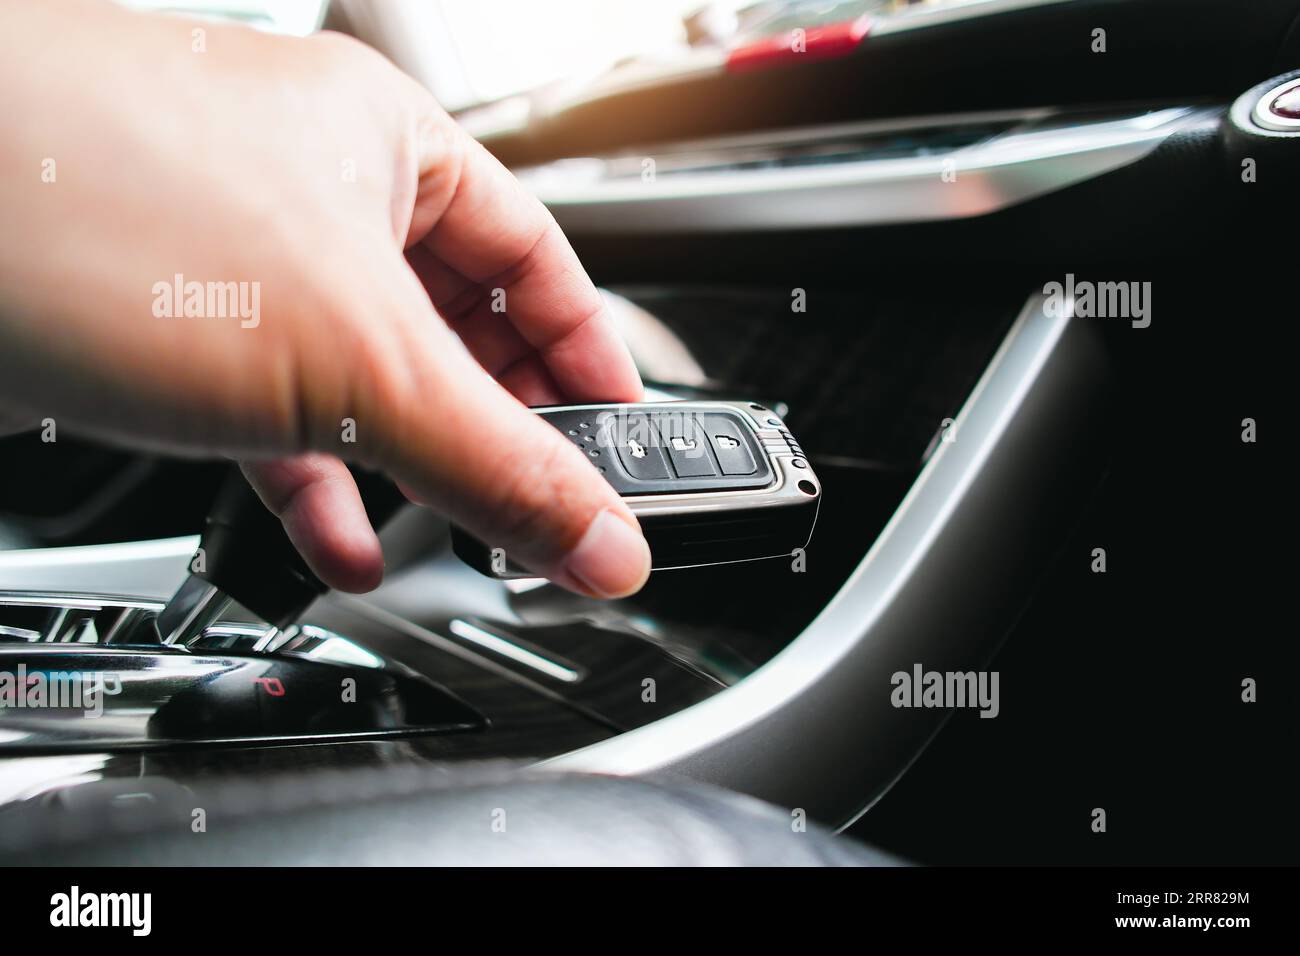 Close up of a driver hand holding a car keyless remote in a car, driver start engine with a car keyless entry remote of a keyless engine start system Stock Photo